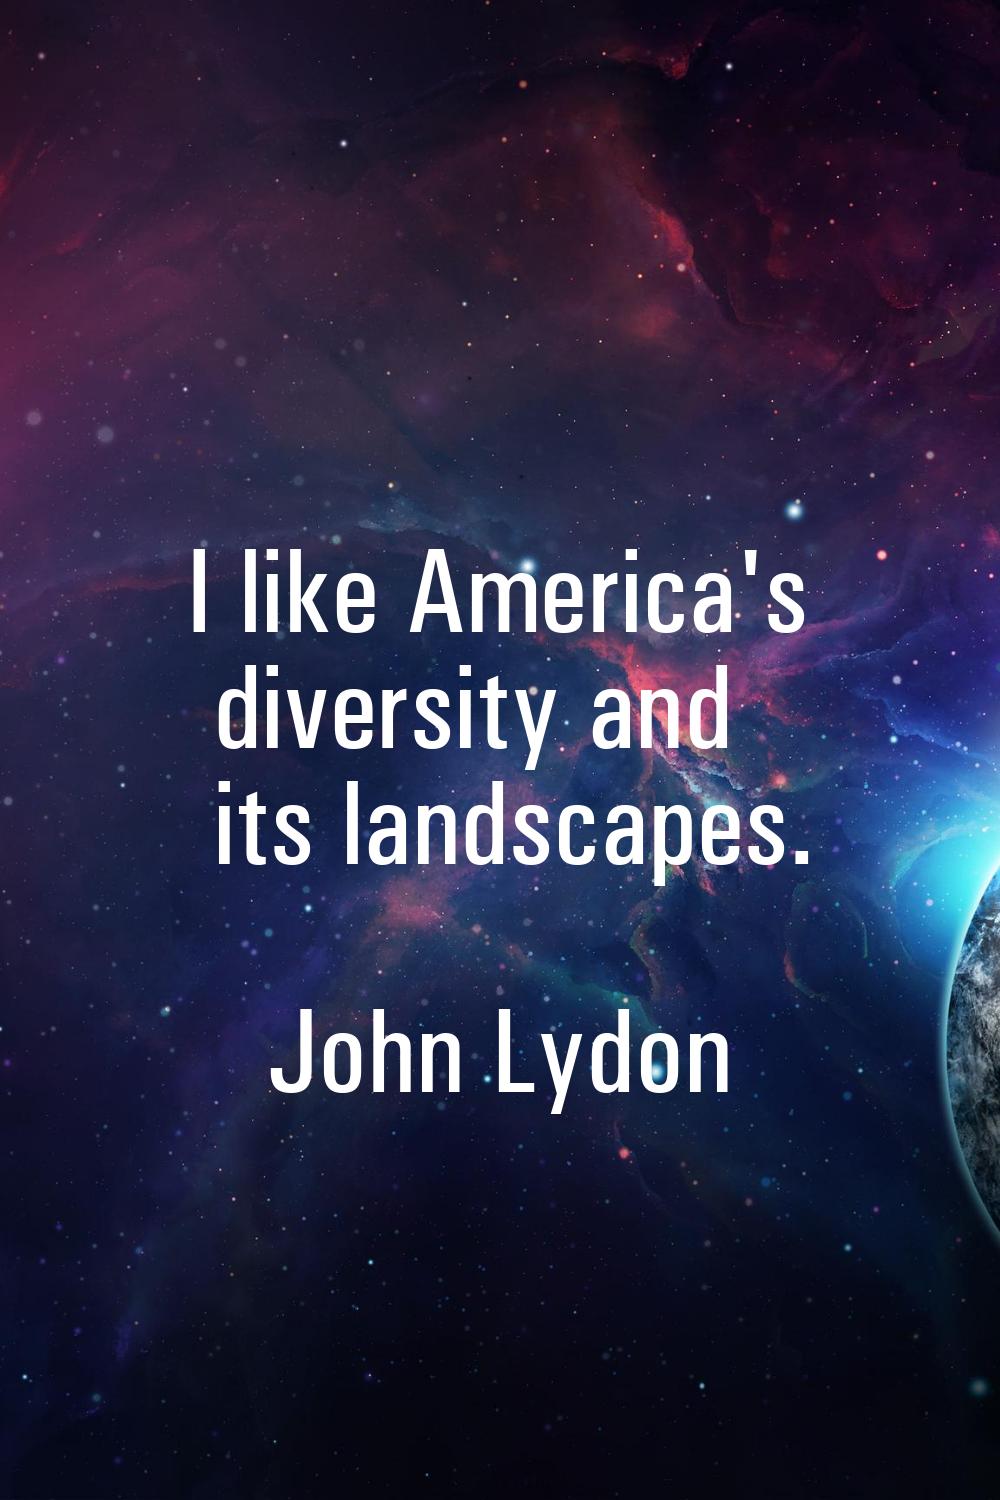 I like America's diversity and its landscapes.